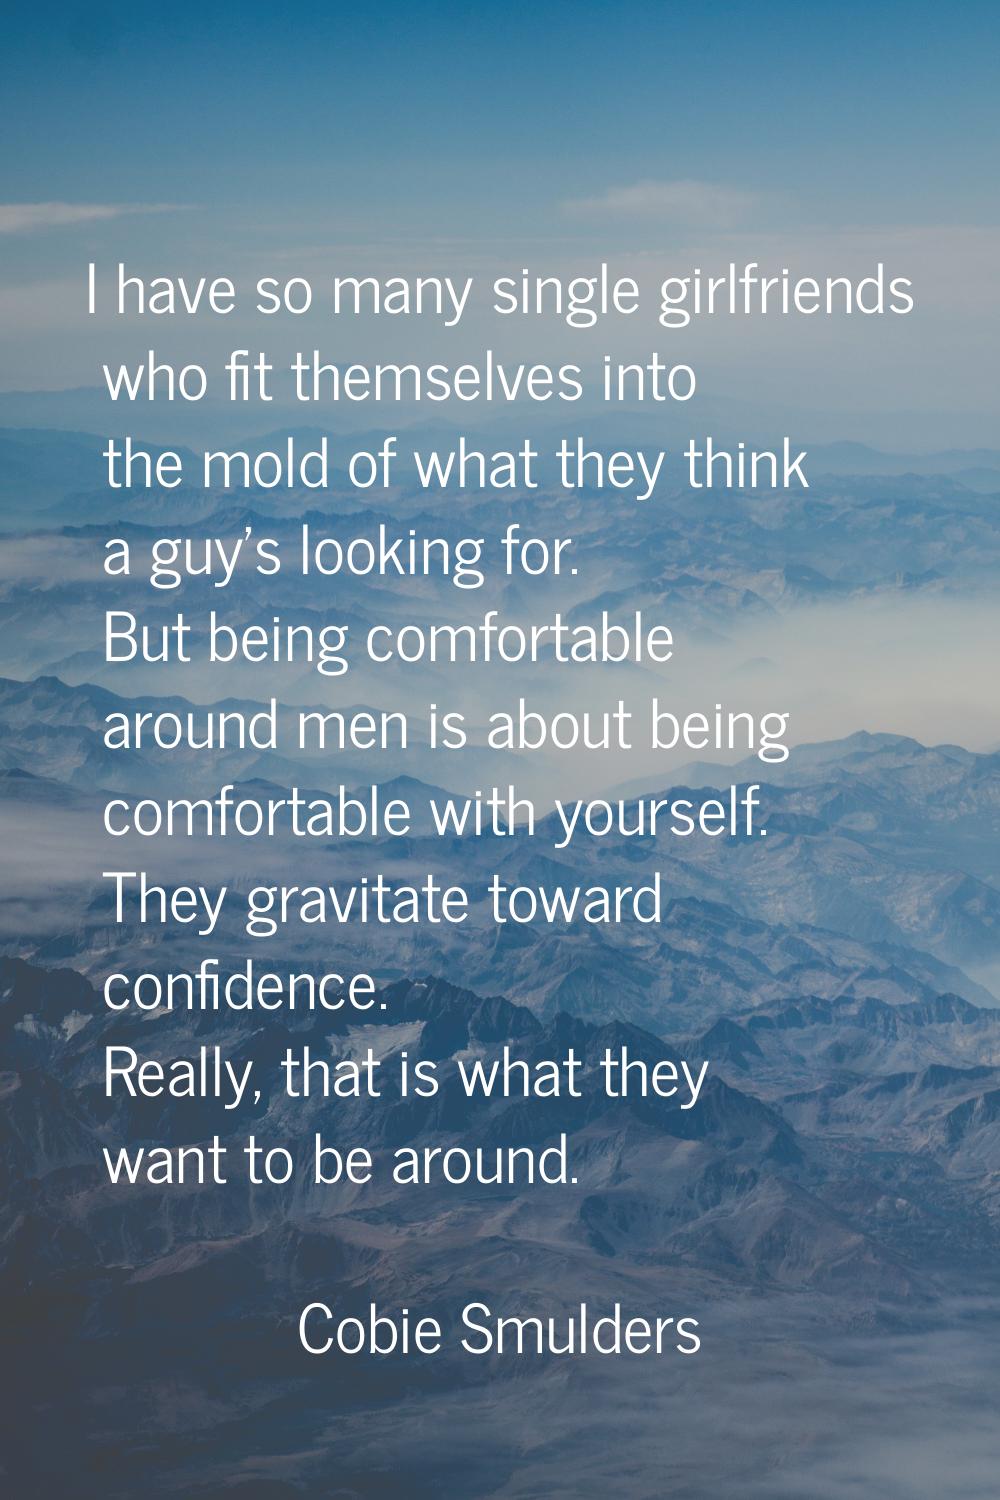 I have so many single girlfriends who fit themselves into the mold of what they think a guy's looki